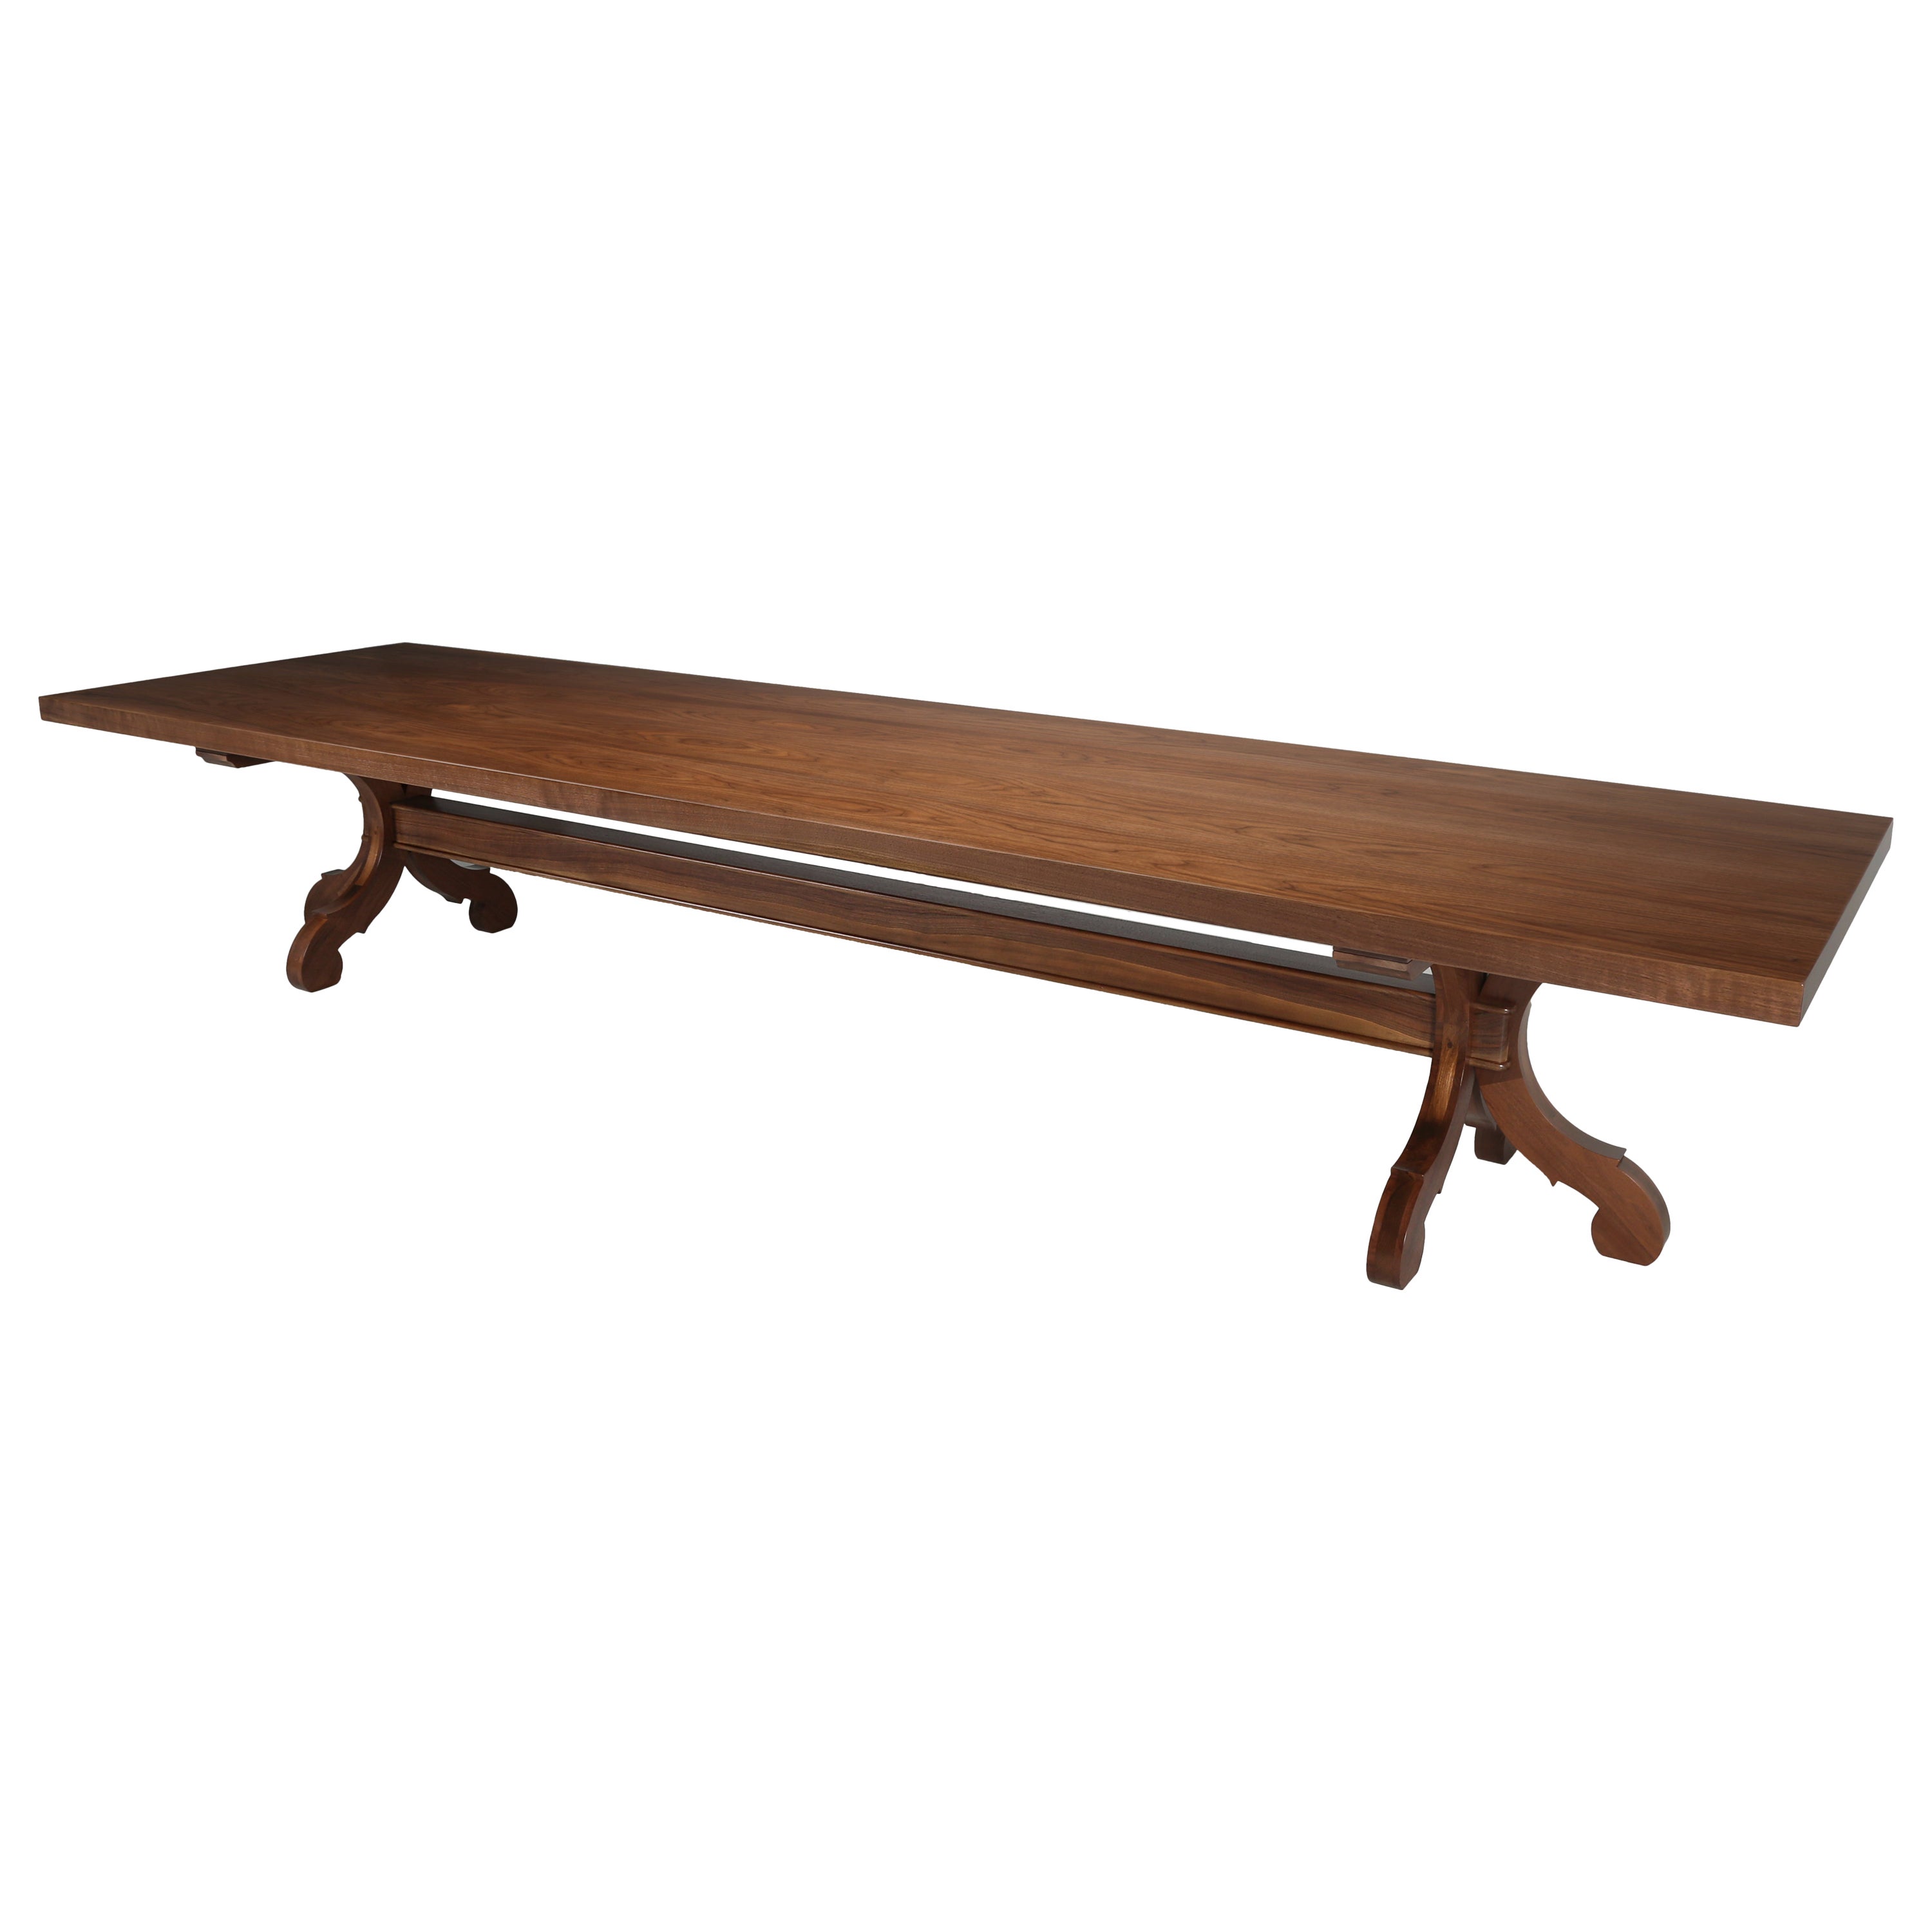 Spectacular Walnut Dining Table Made in Chicago by Old Plank to Order For Sale